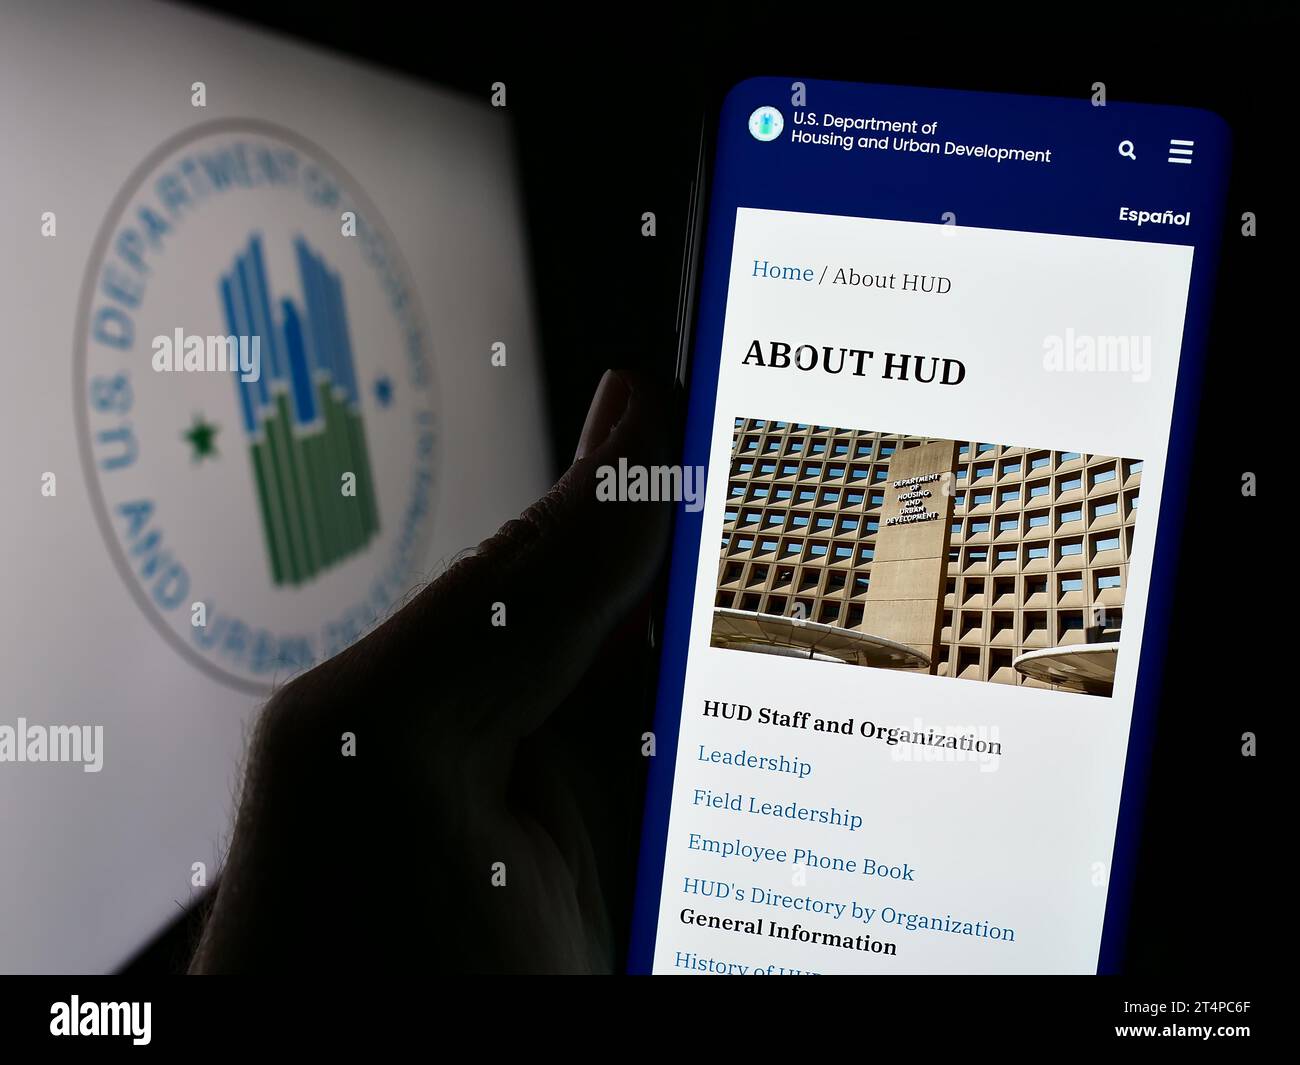 Person holding cellphone with webpage of US Department of Housing and Urban Development (HUD) in front of logo. Focus on center of phone display. Stock Photo